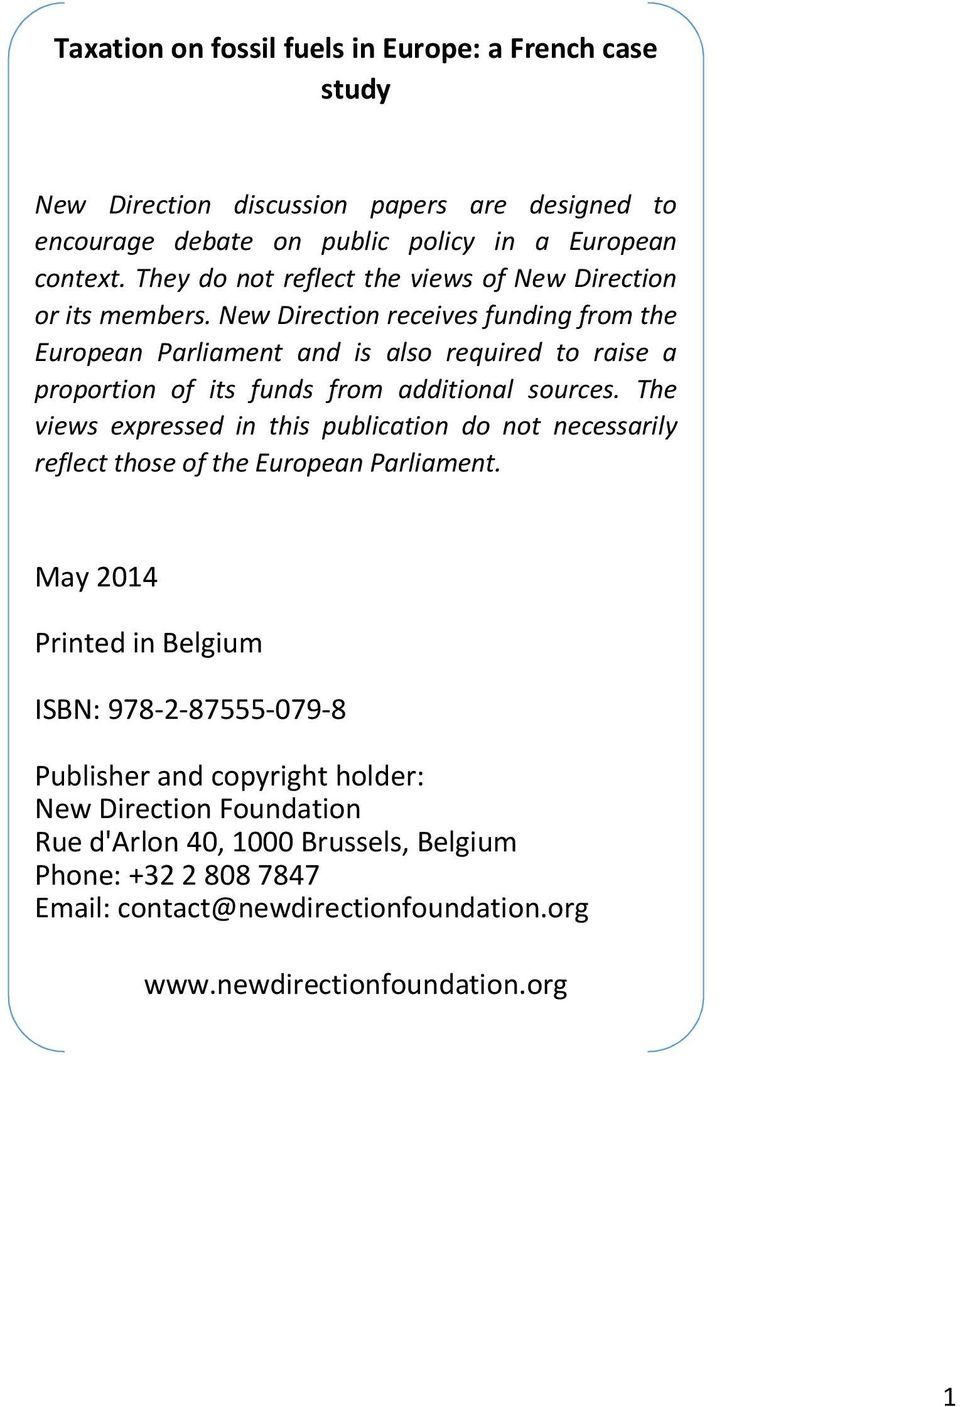 New Direction receives funding from the European Parliament and is also required to raise a proportion of its funds from additional sources.